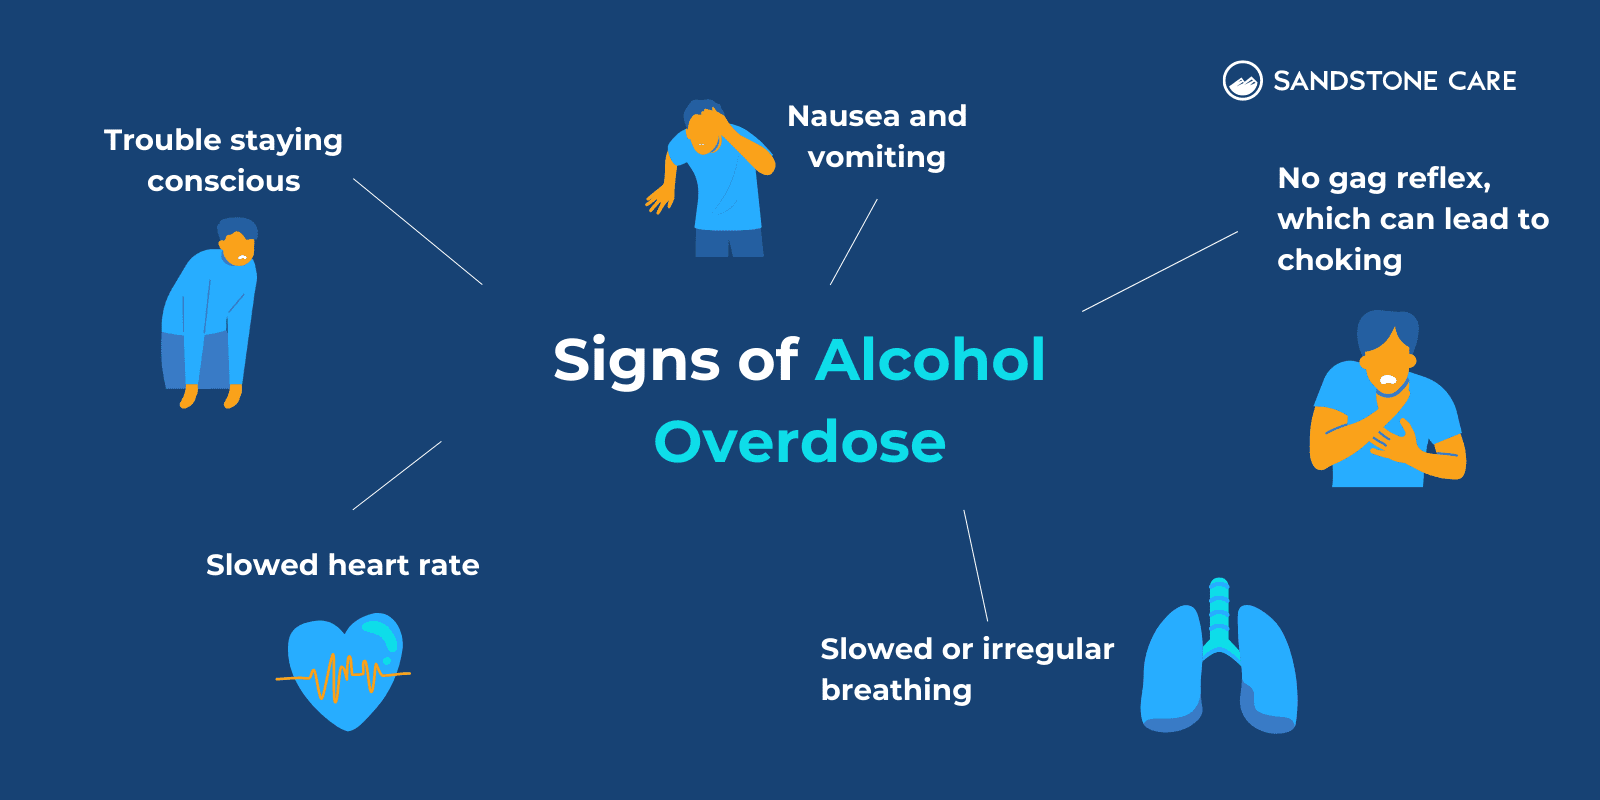 Signs of alcohol overdose are illustrated with different digital illustrations